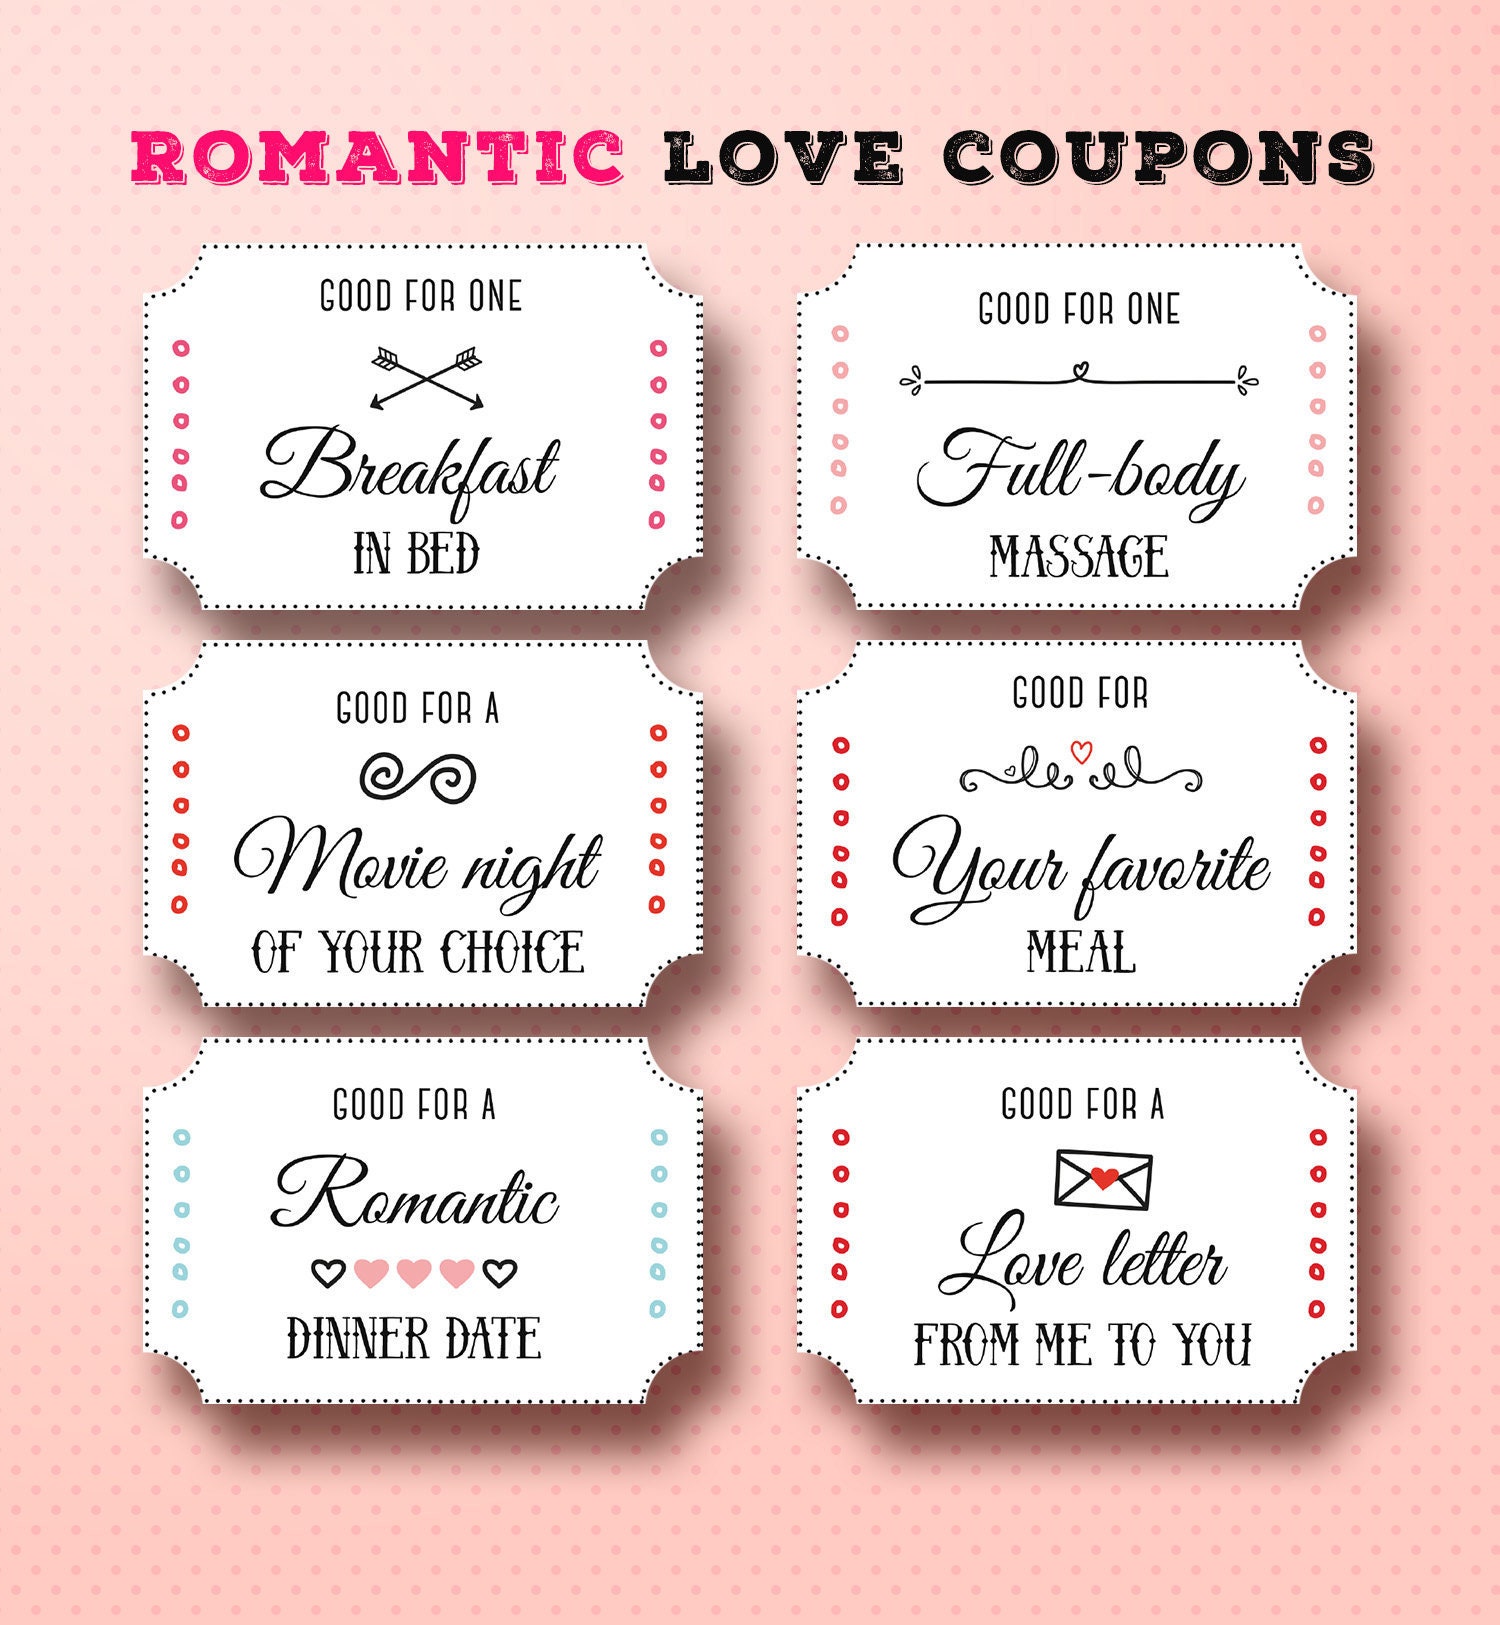 Romantic Coupon Book Ideas For Her.